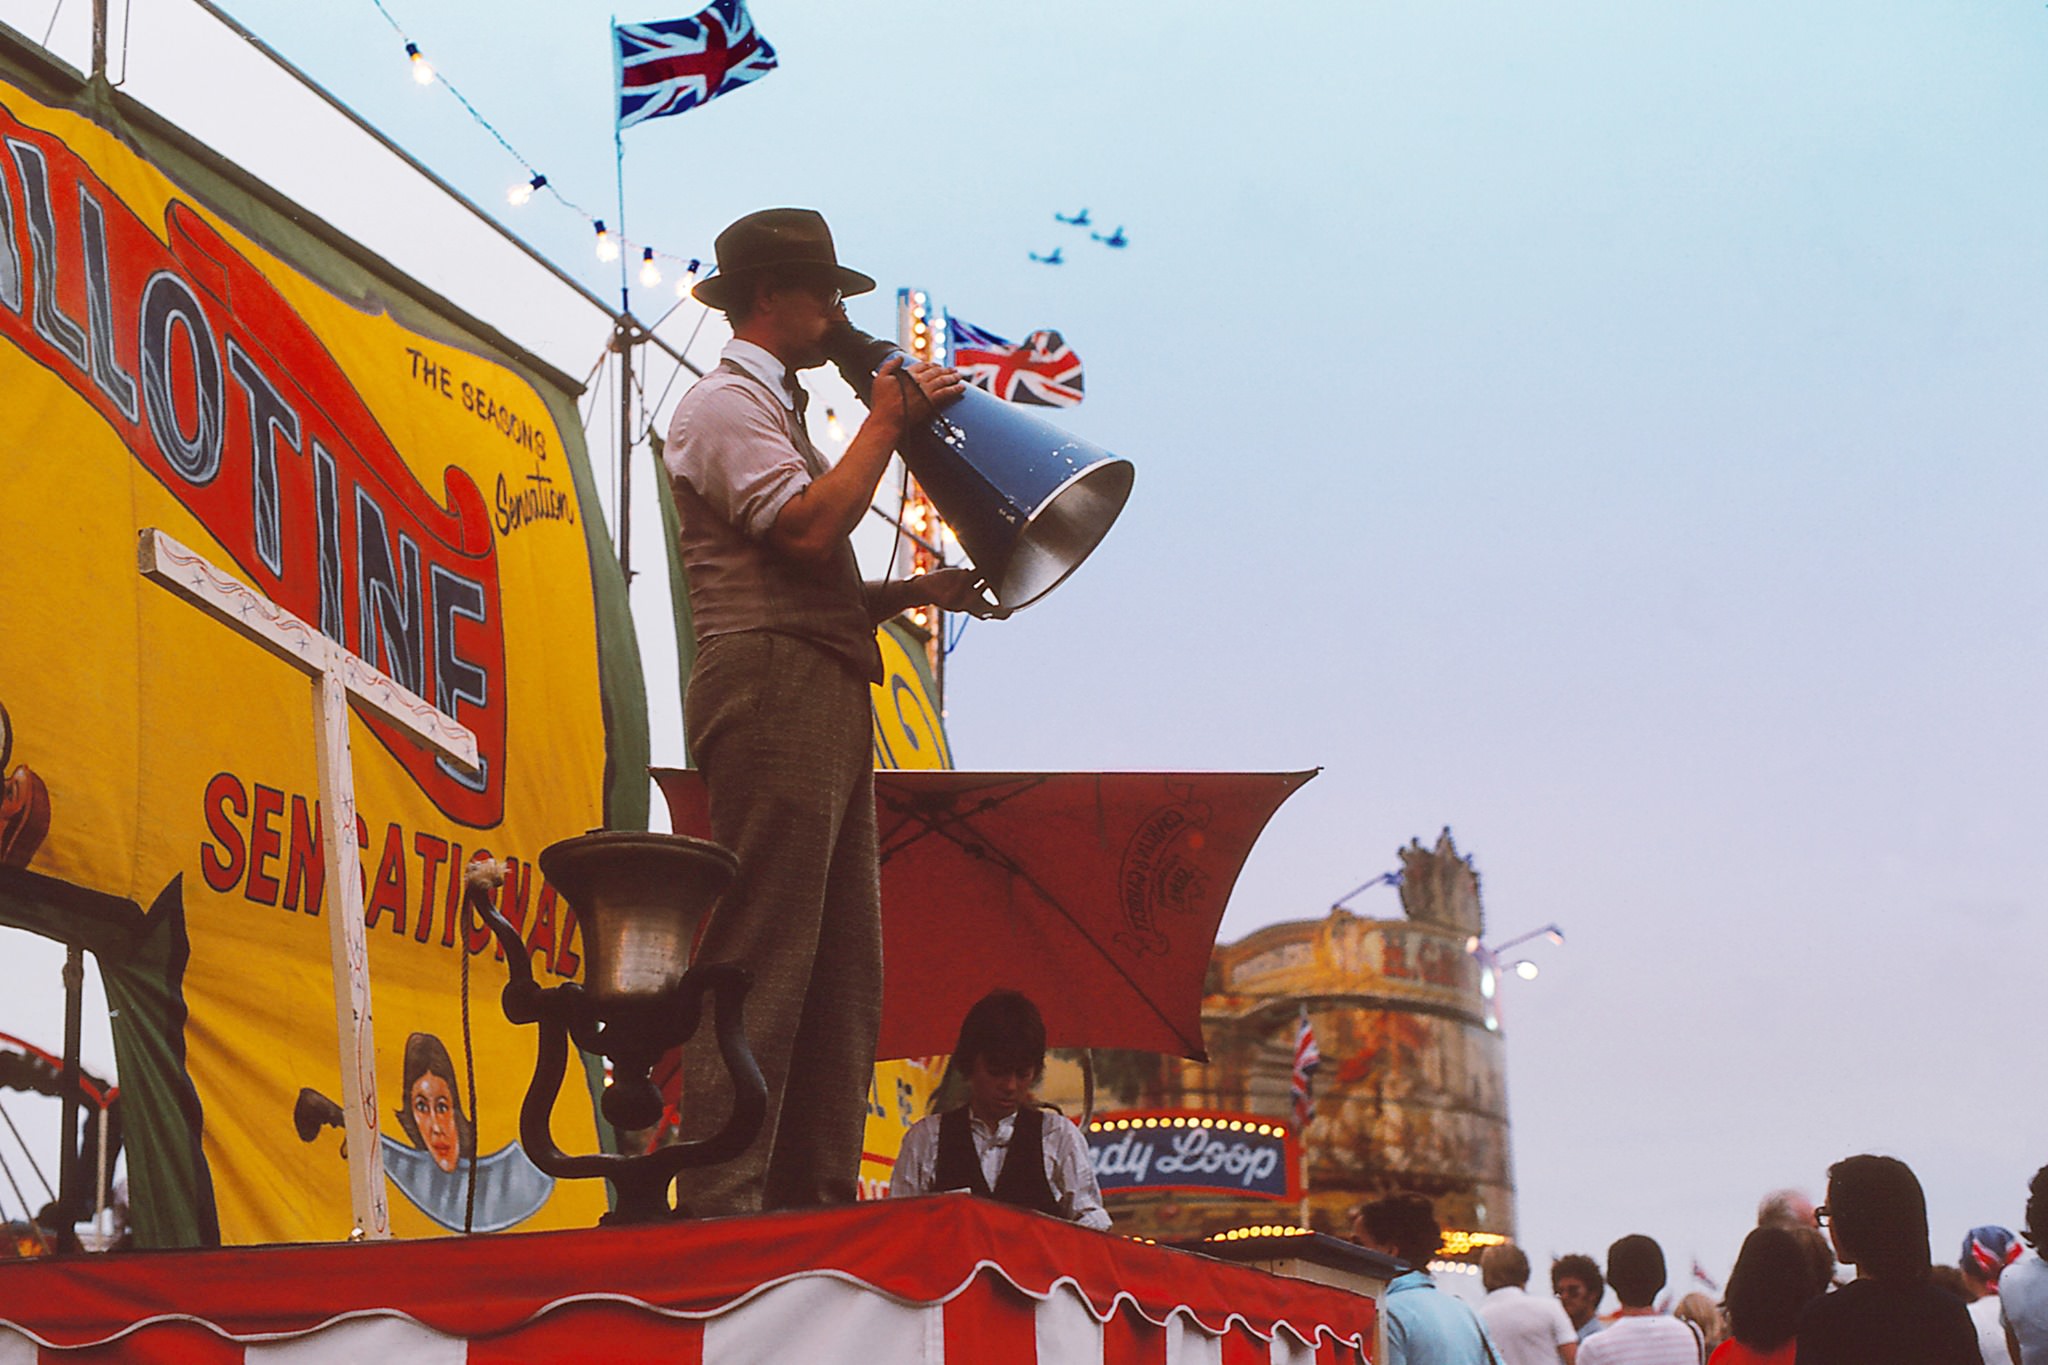 At the 100th Anniversary of the CNE, 1975